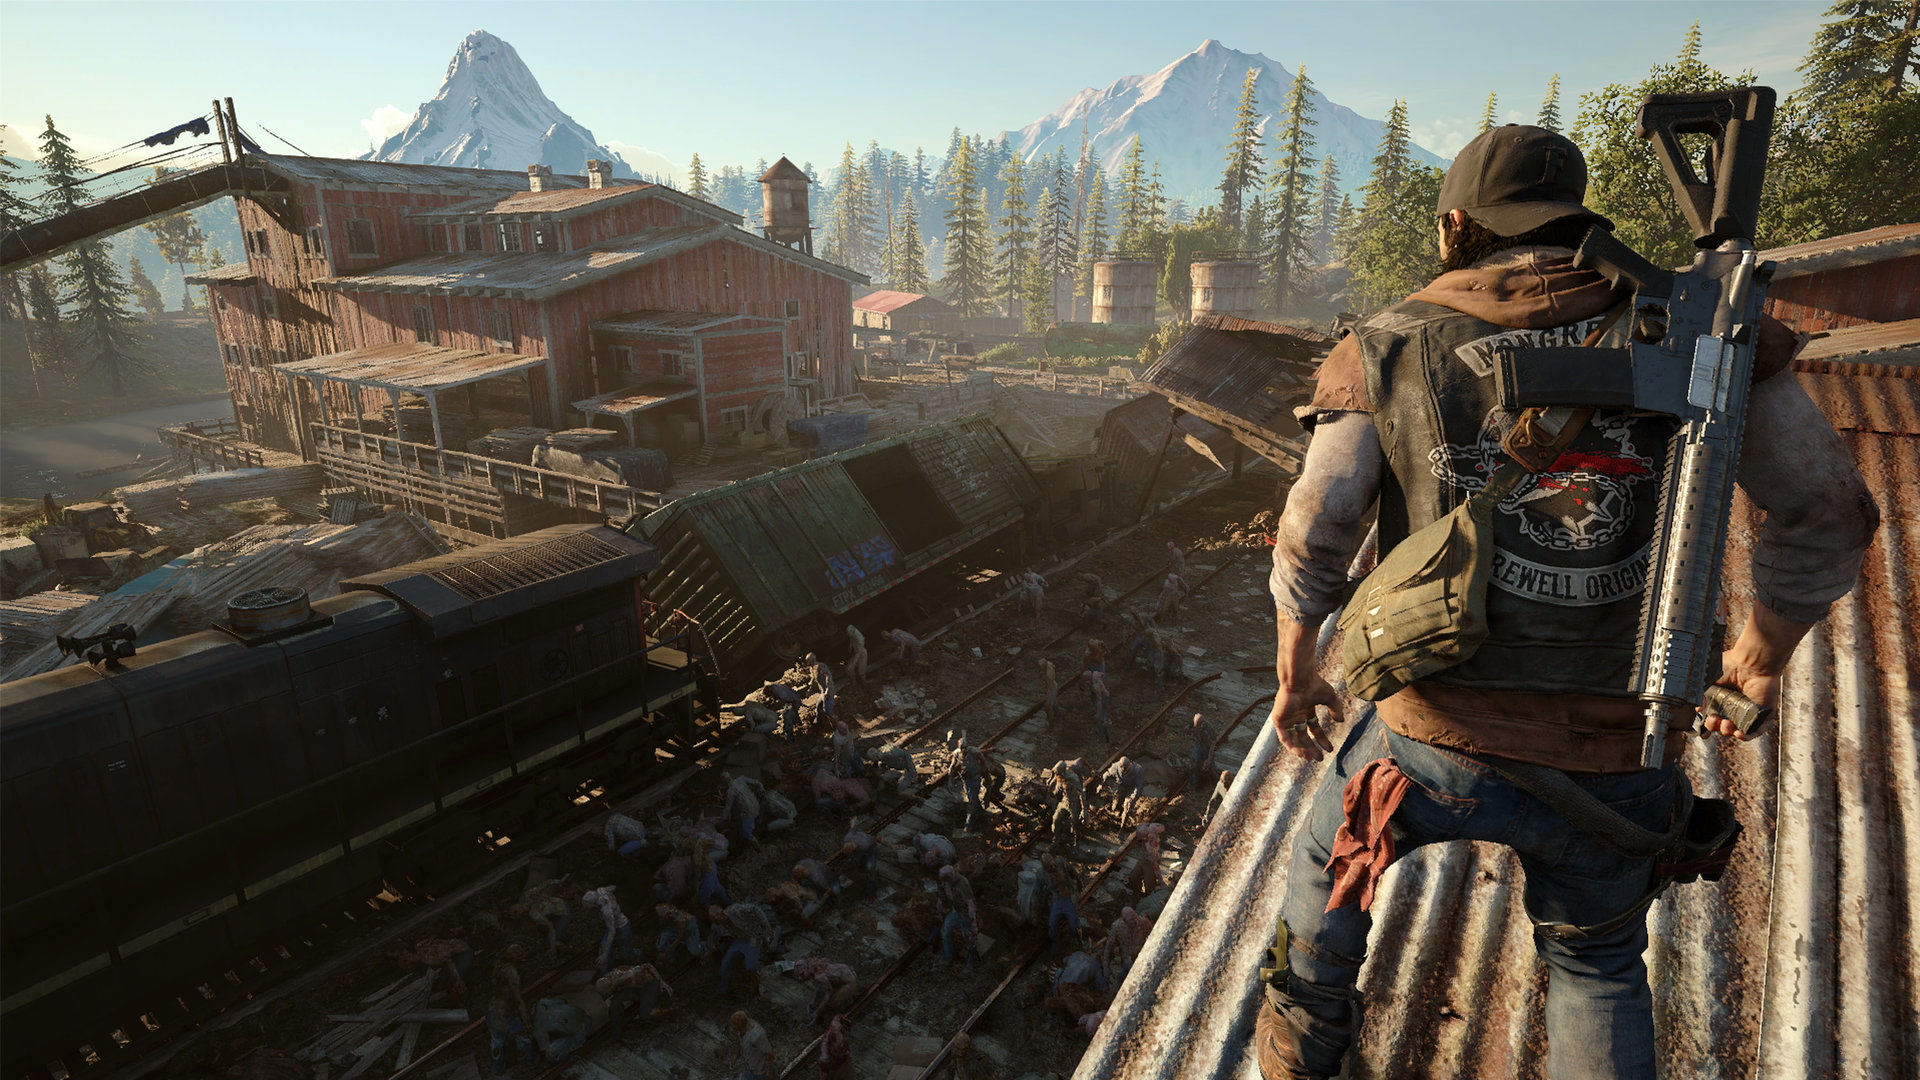 Days Gone Gets 7 Minutes of Gameplay Footage During E3 2017